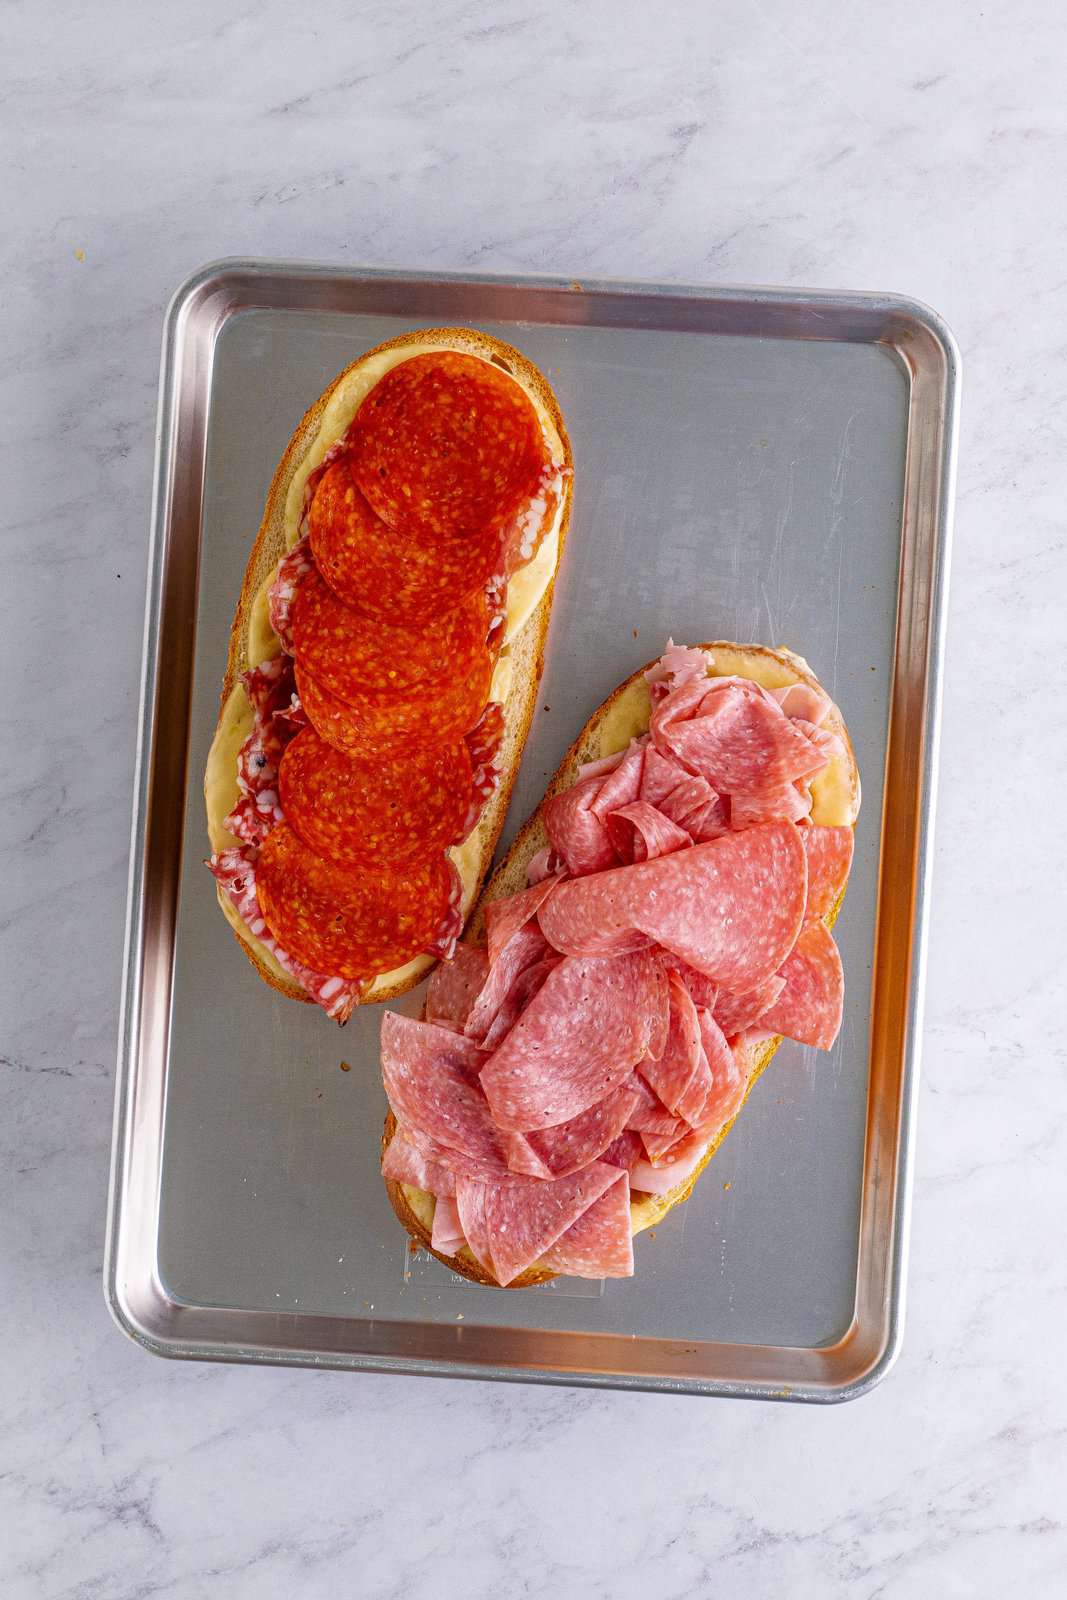 slices of pepperoni added to one side of the sub rolls and sliced salami added to the other side of the sub rolls.